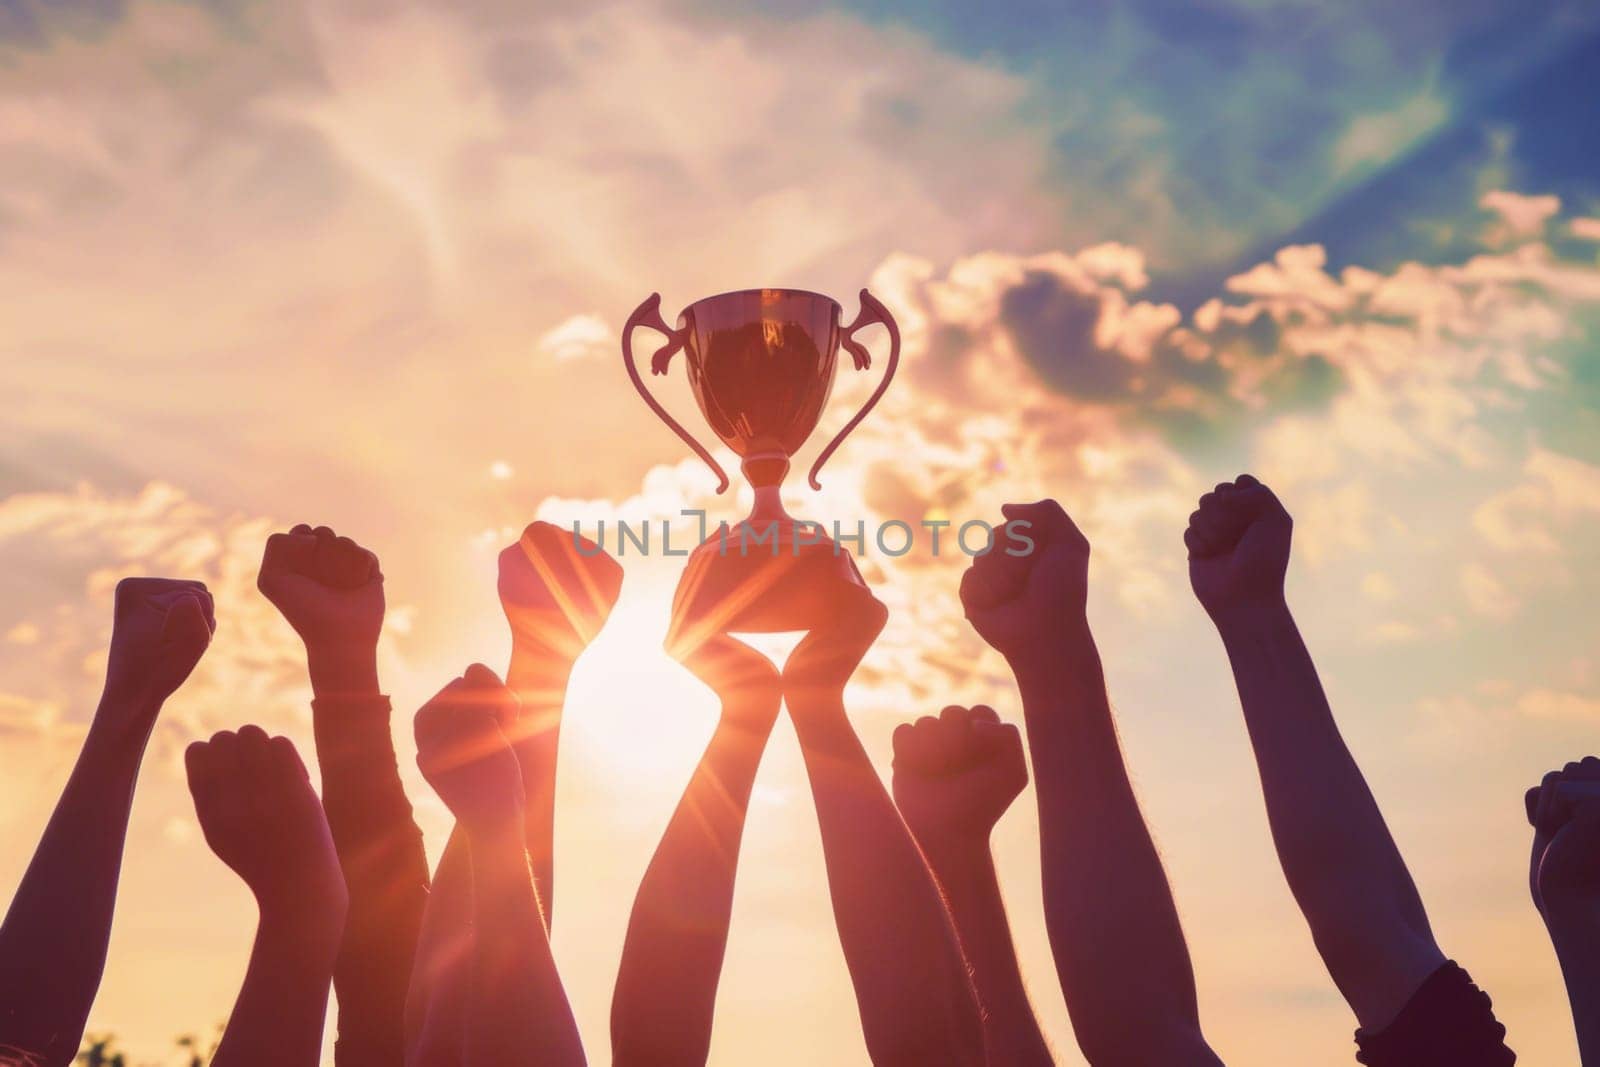 A group of people are holding up a trophy in the air. The trophy is surrounded by the hands of the people, and the sun is shining brightly in the background. Scene is celebratory and triumphant